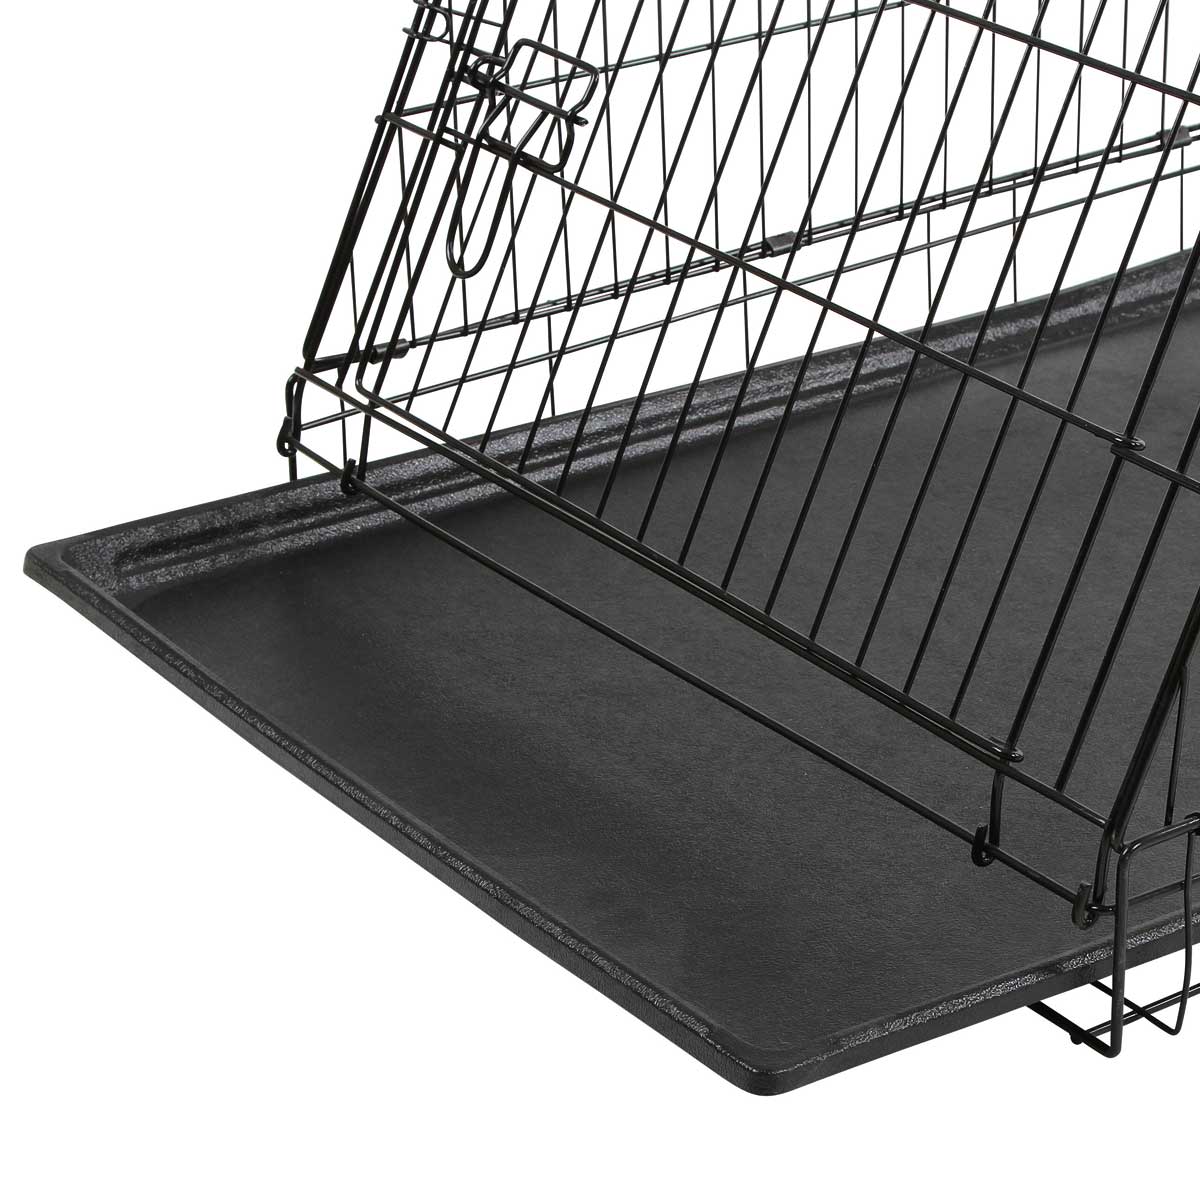 Dog Cage collapsible black 107x74x85cm, 2 doors